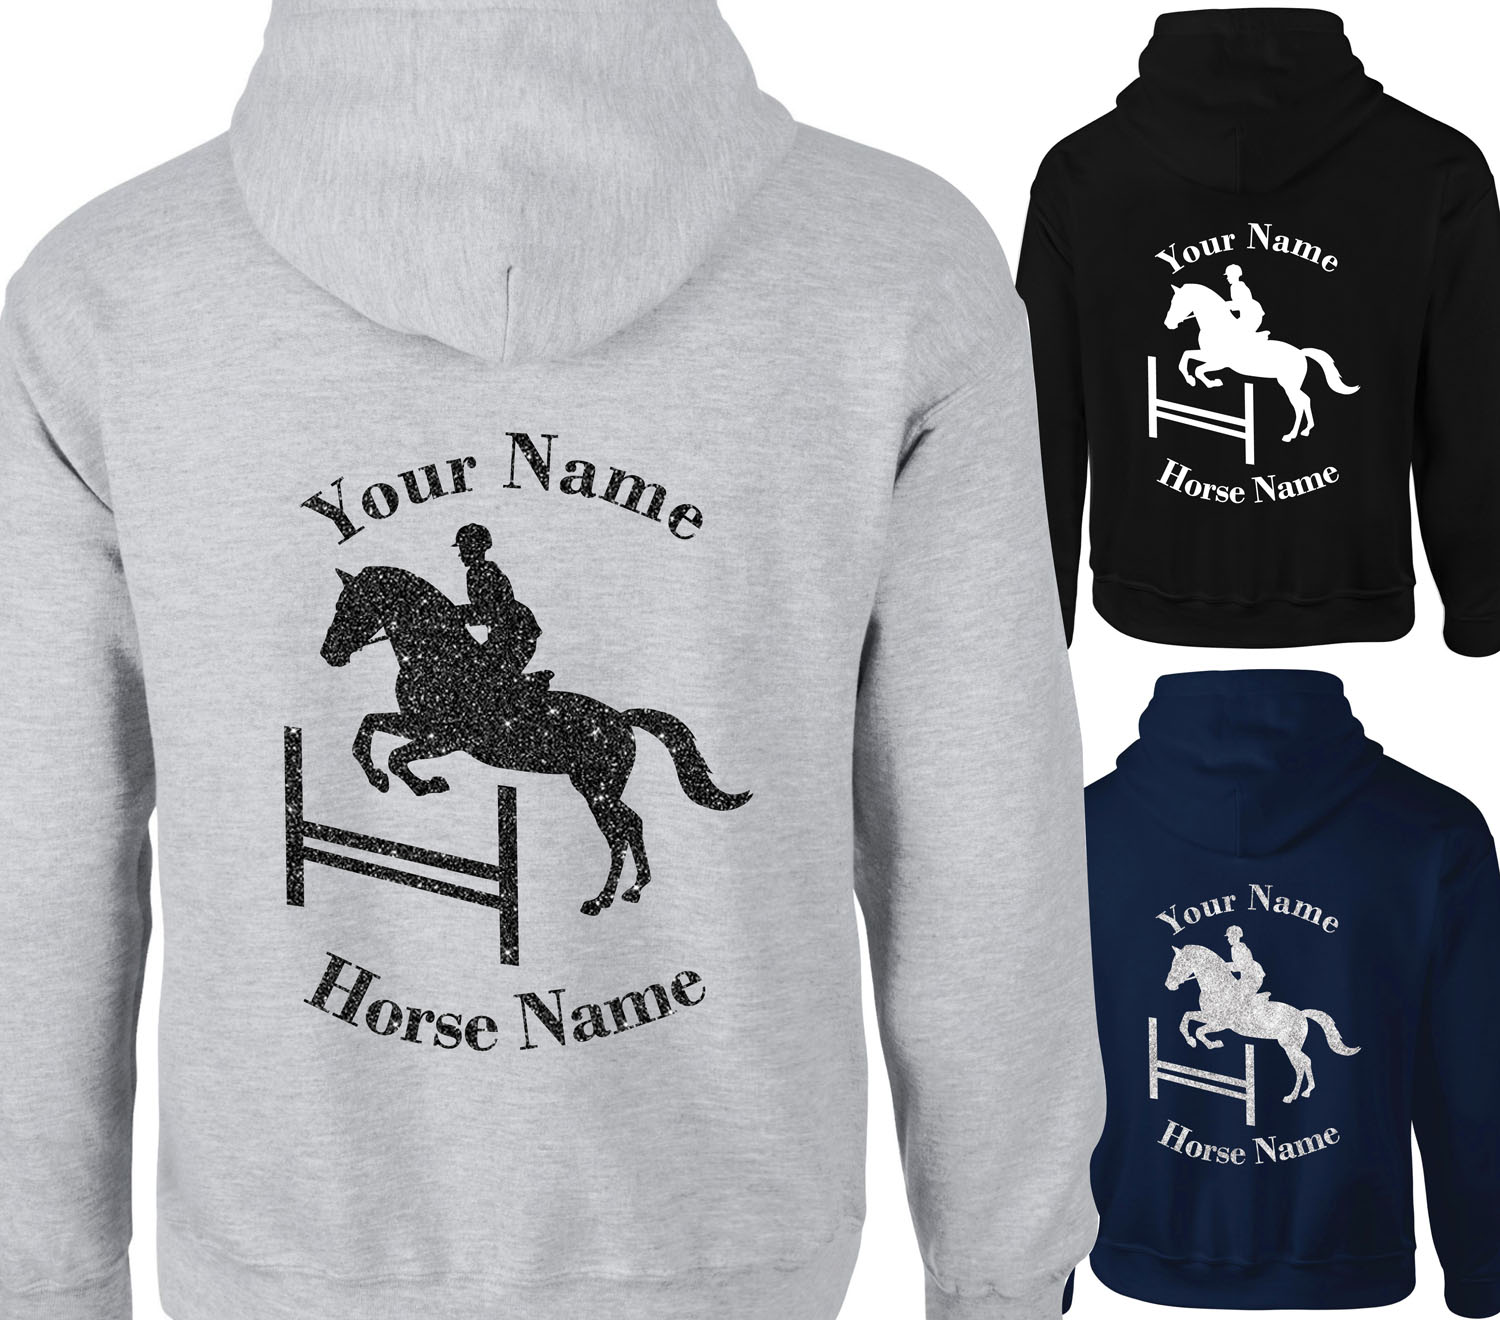 Time Spent Horse Riding Hoodie Personalised Funny Ideal Birthday Gift Rider 